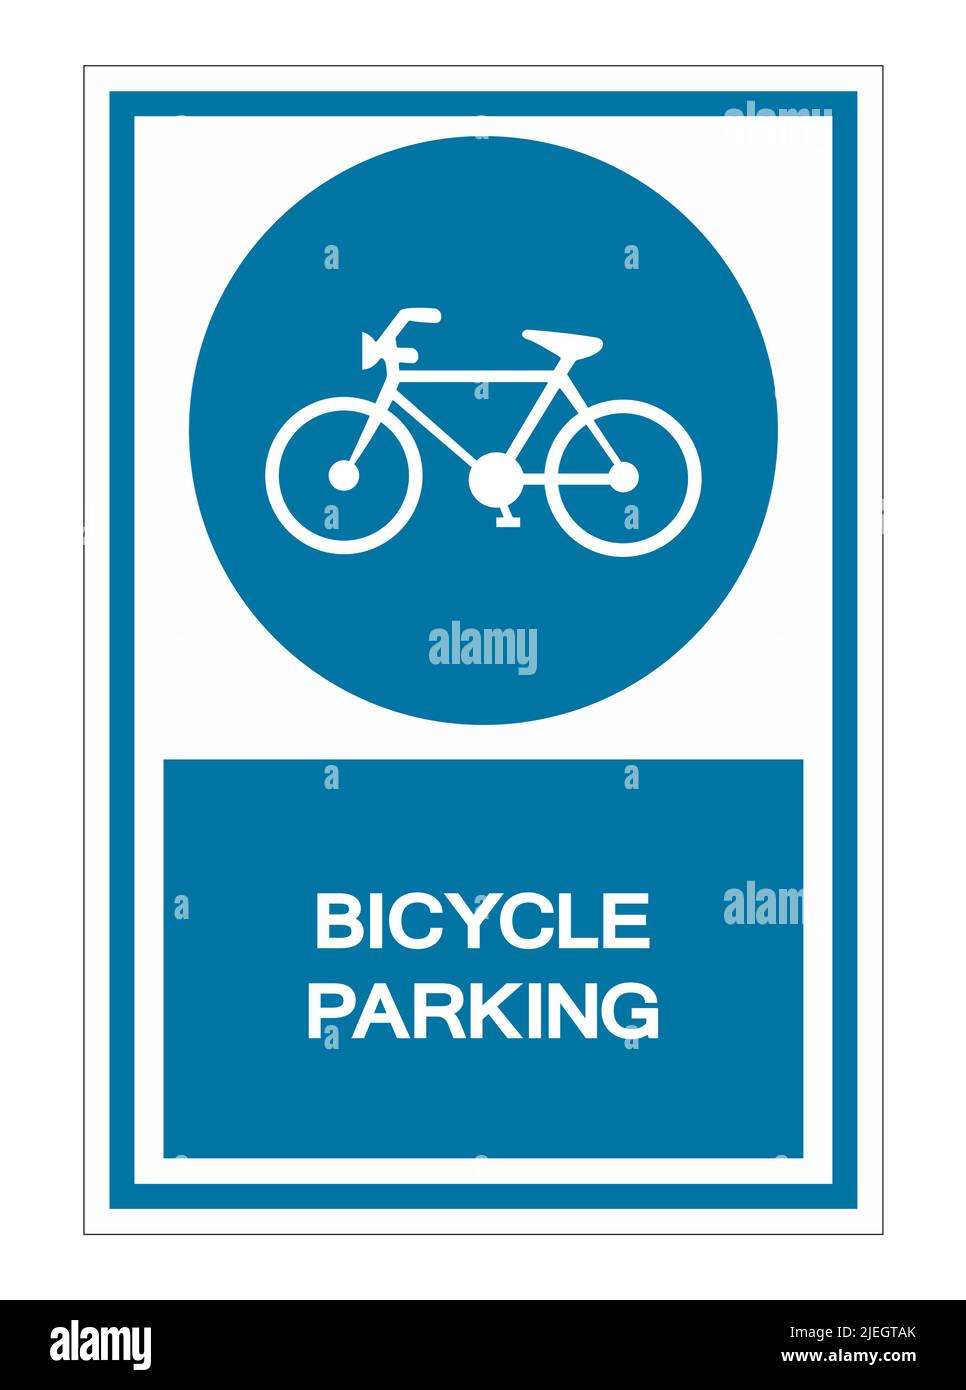 Bicycle Parking Symbol Sign Isolate on White Background,Vector Illustration Stock Vector